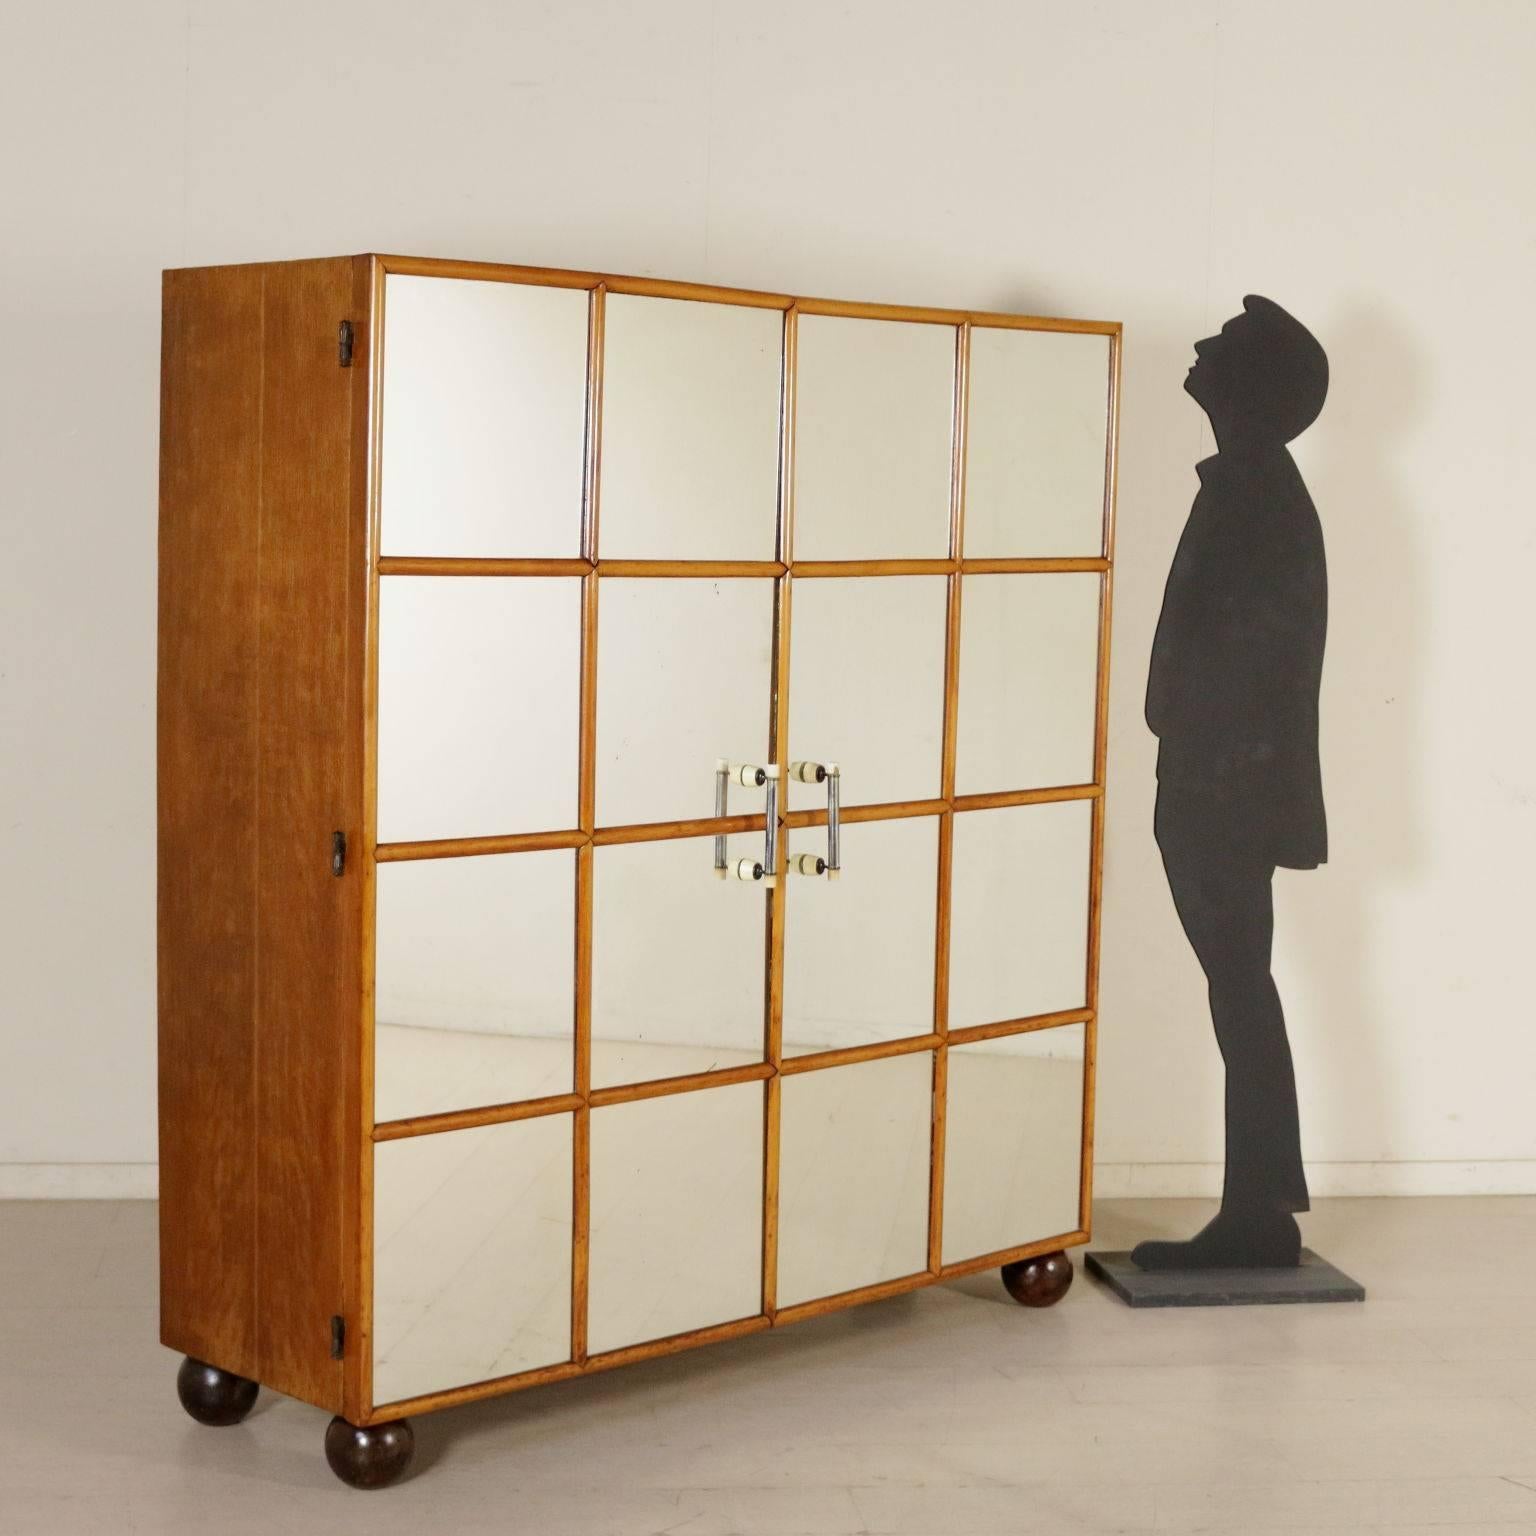 A wardrobe with two hinged doors, durmast veneer and mirrors. Manufactured in Italy, 1940s-1950s.